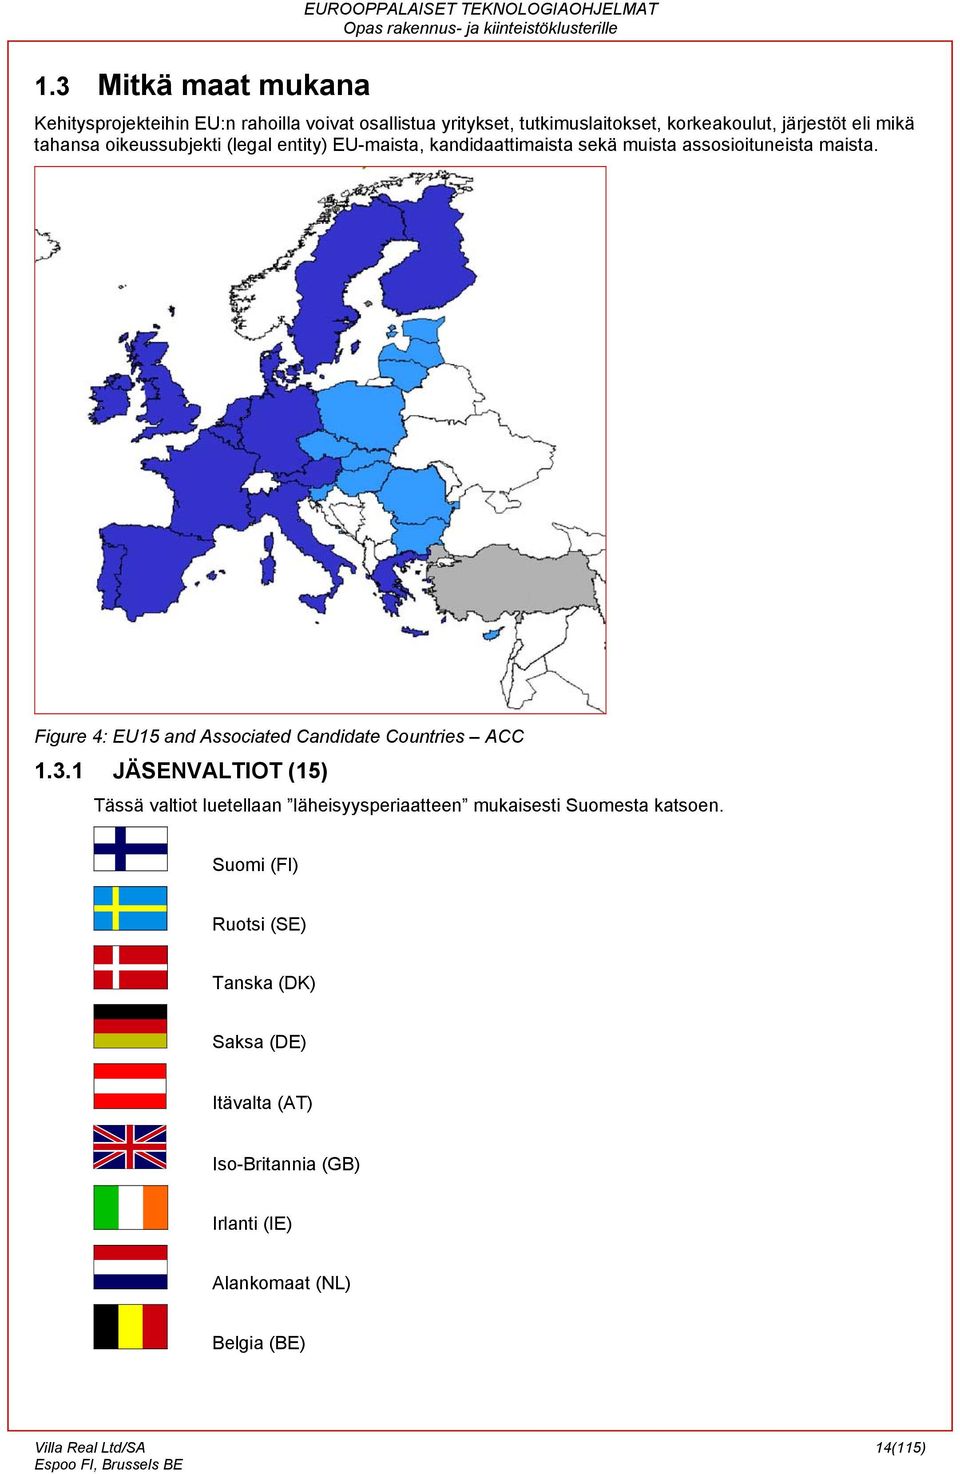 Figure 4: EU15 and Associated Candidate Countries ACC 1.3.